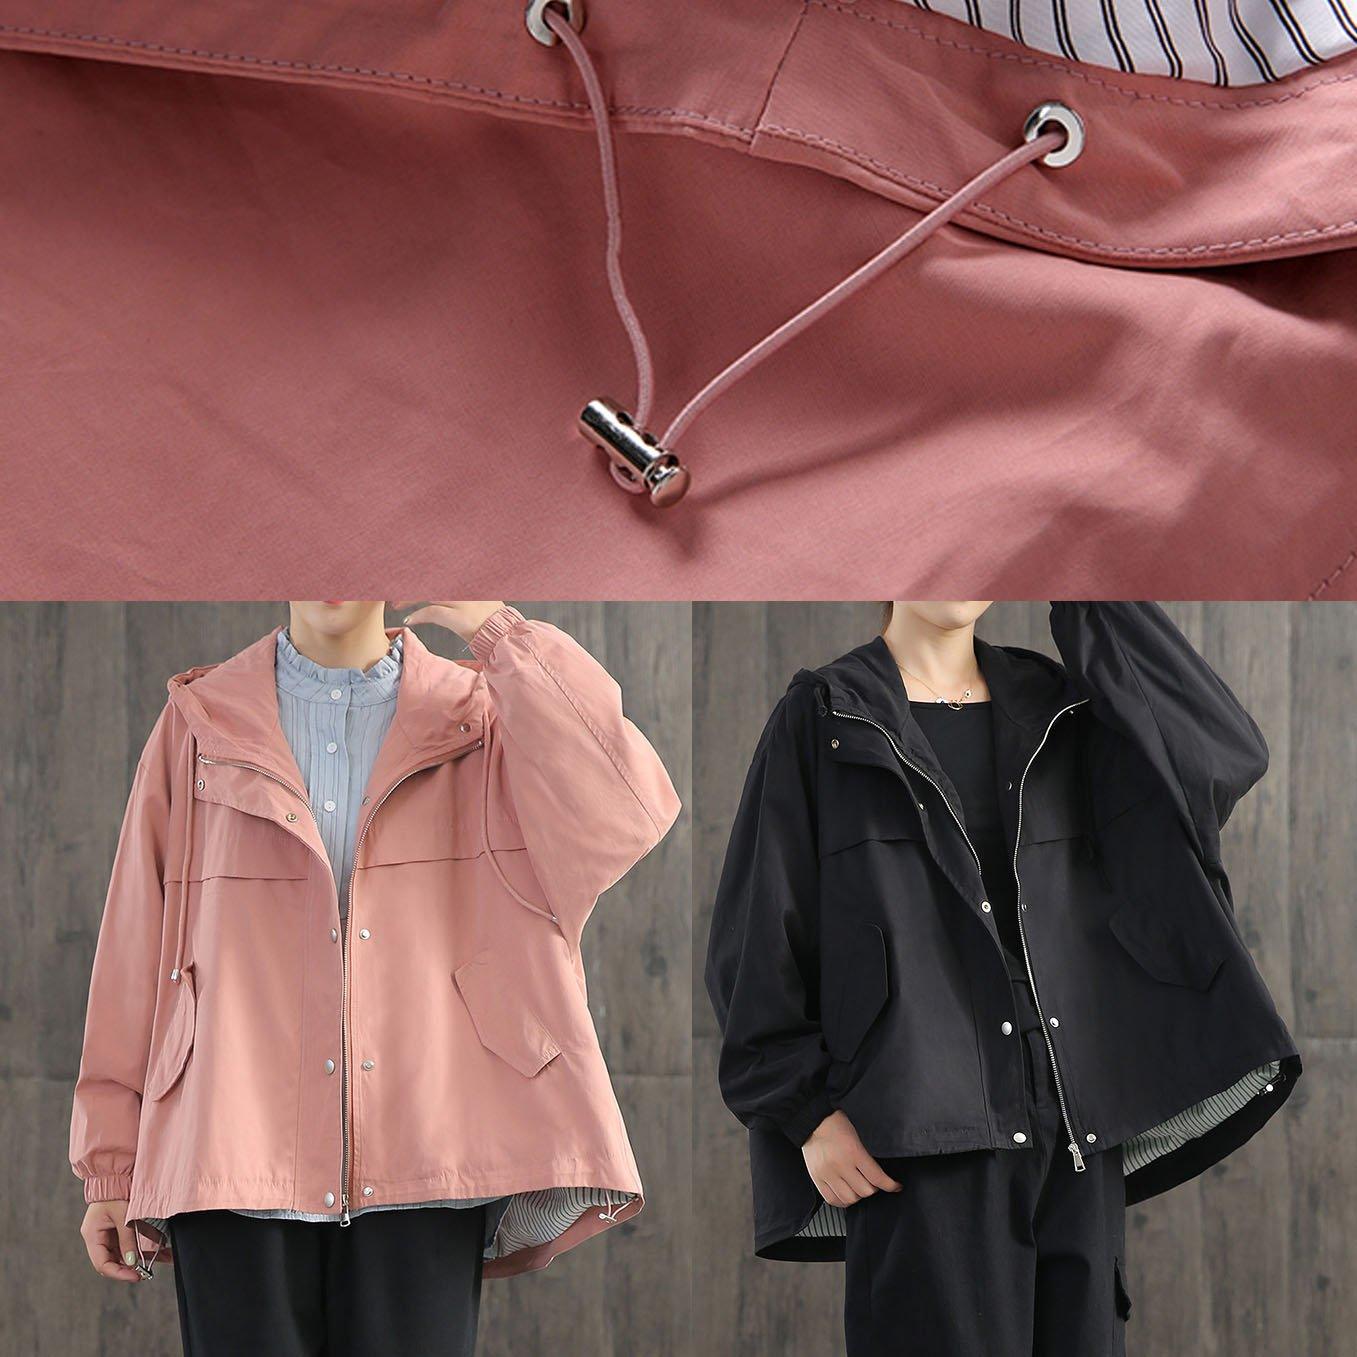 Italian pink cotton Blouse hooded zippered daily fall coats - Omychic